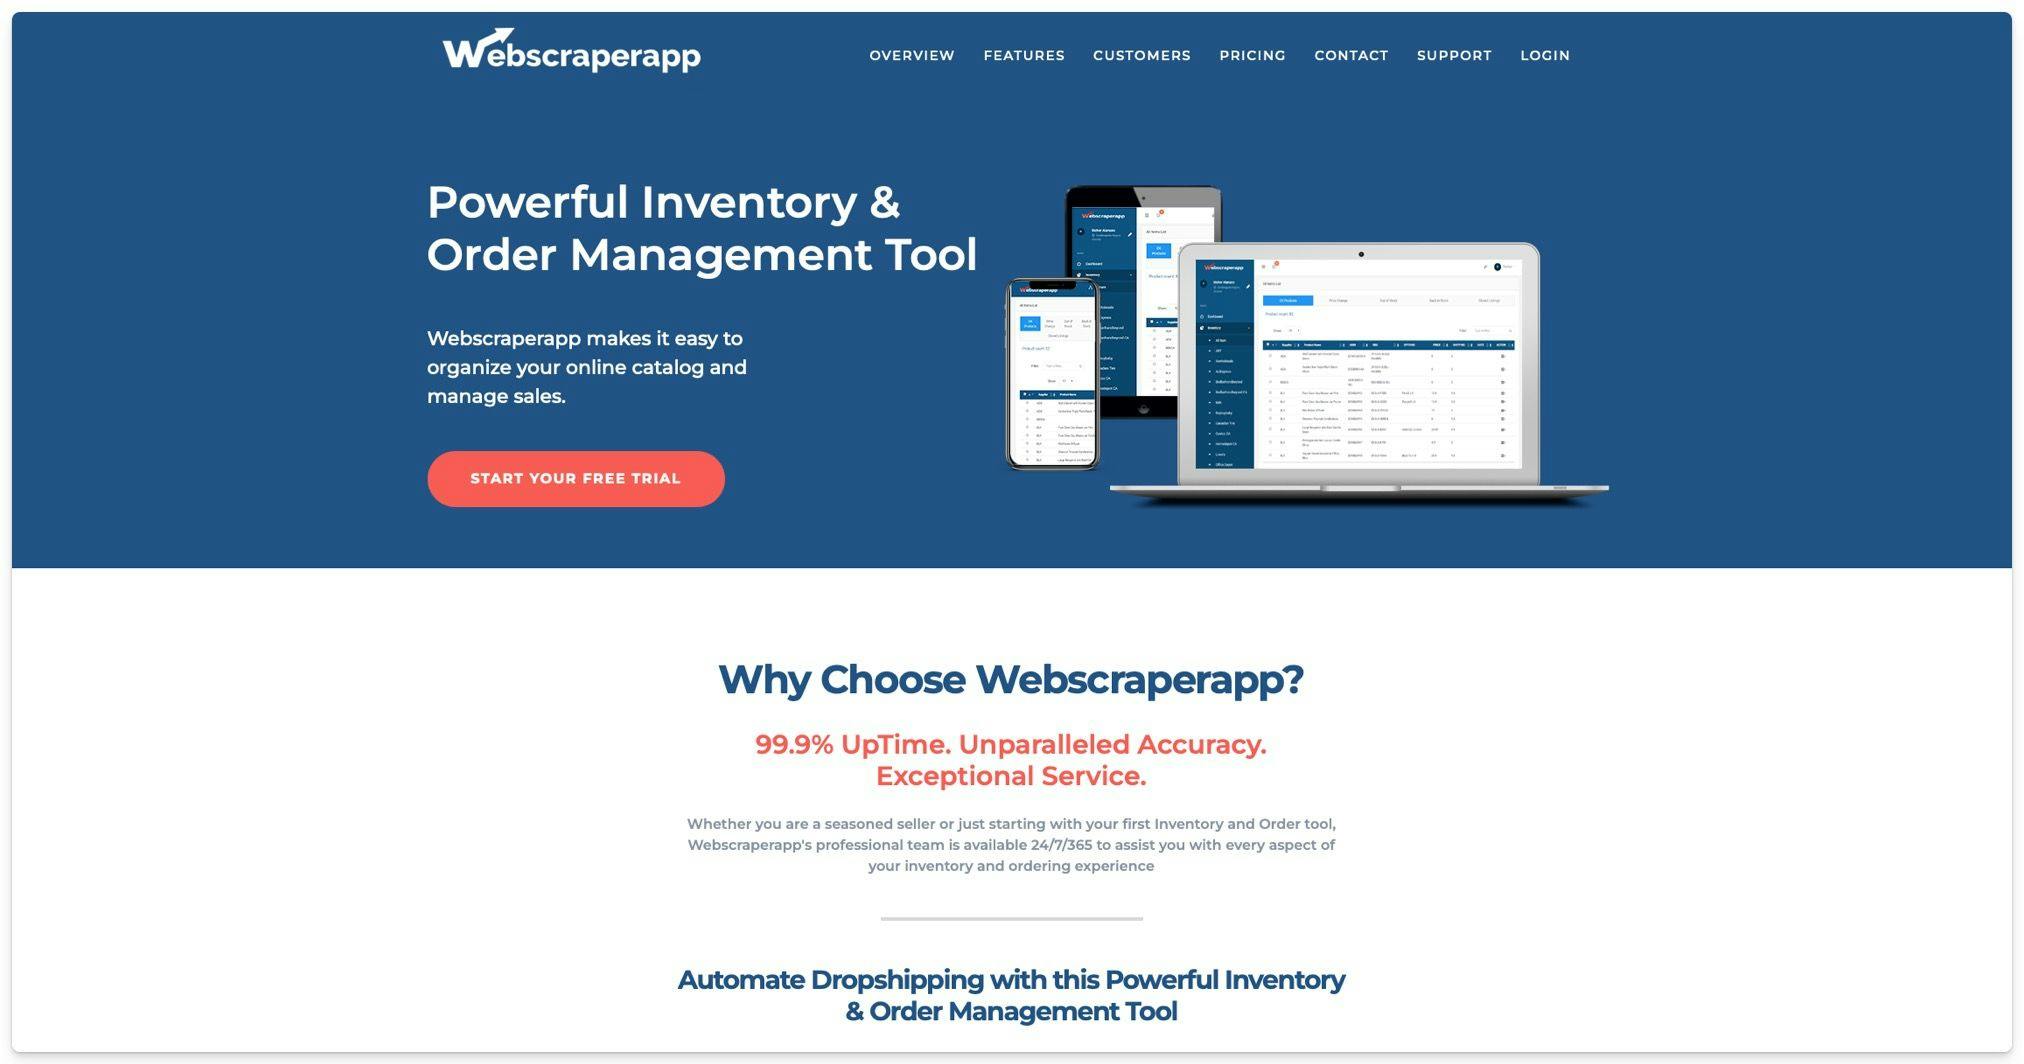 Webscraperapp: What You Need to Know